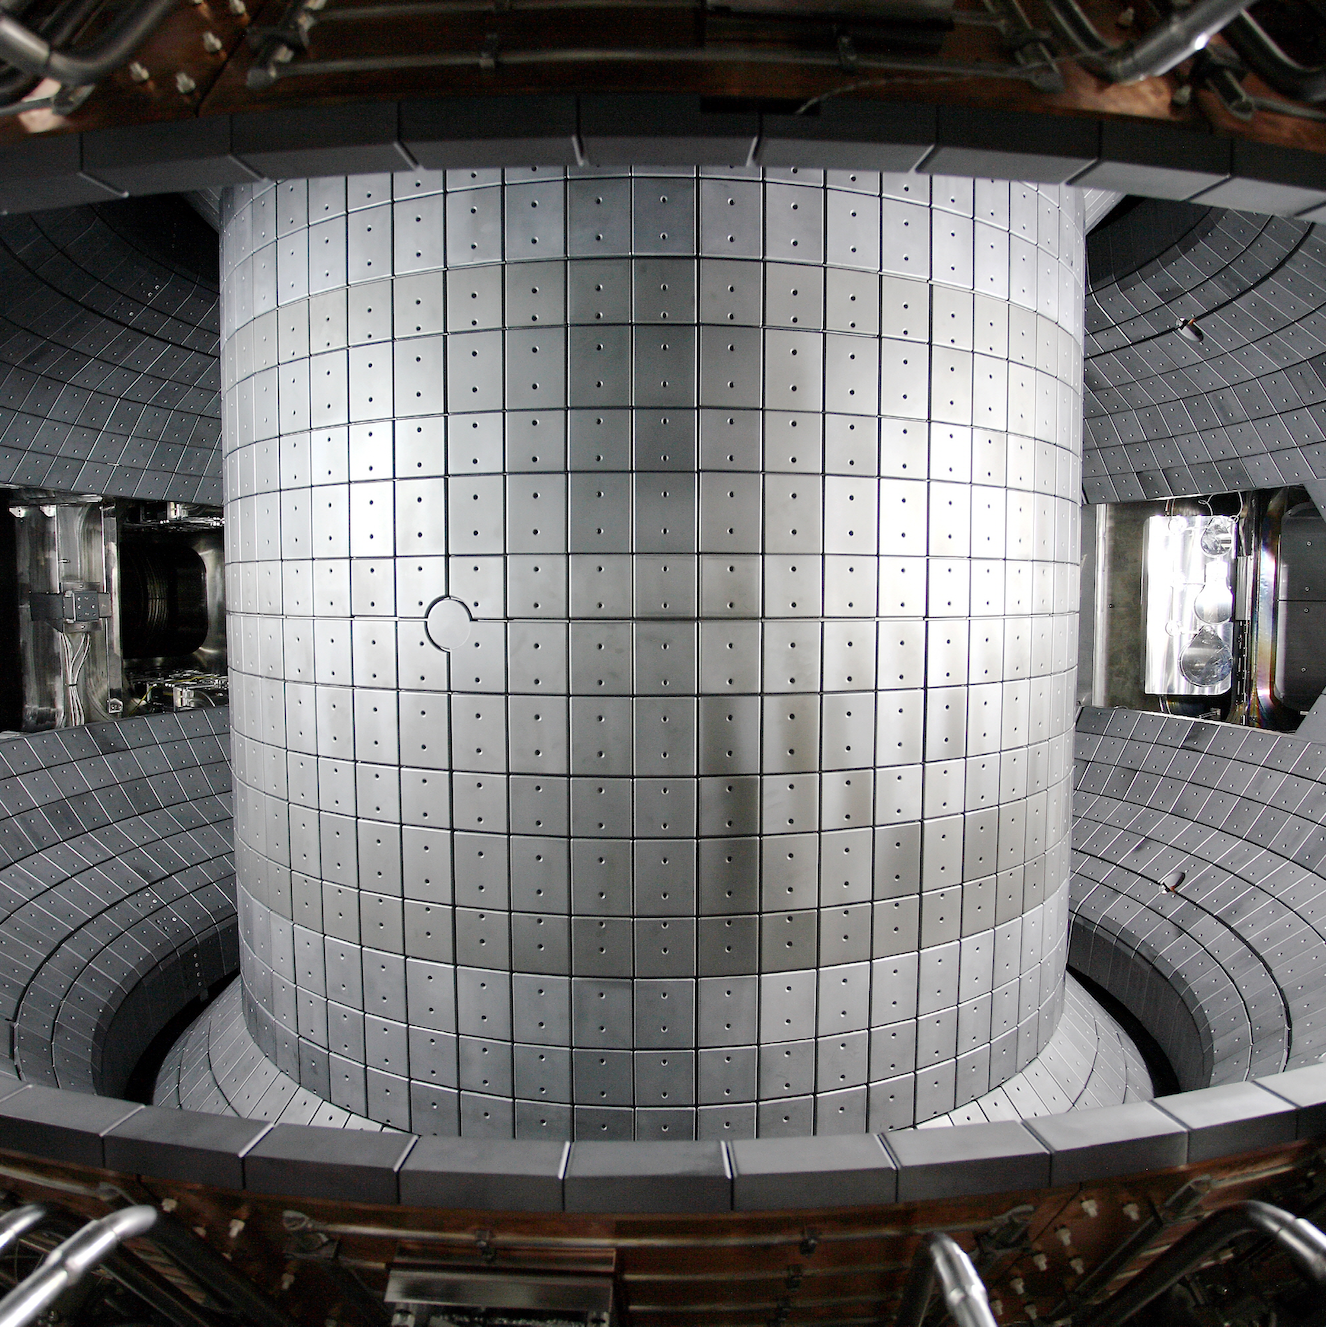 This Fusion Reactor Hit Temps 7 Times Hotter Than the Sun for 30 Seconds